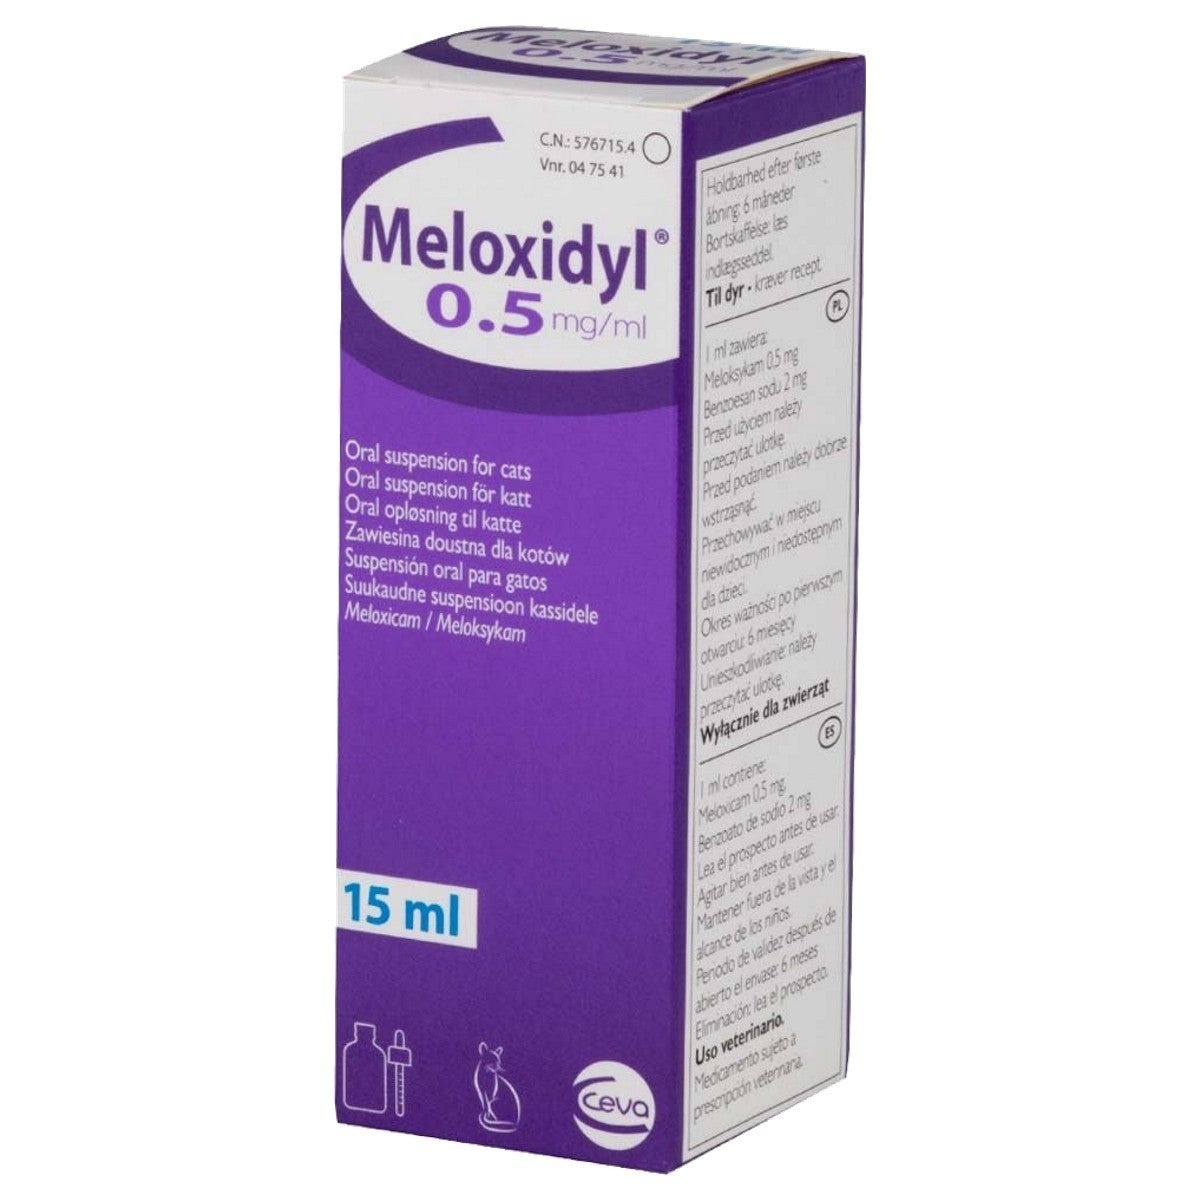 Meloxidyl oral solution for cats 0.5mg/ml